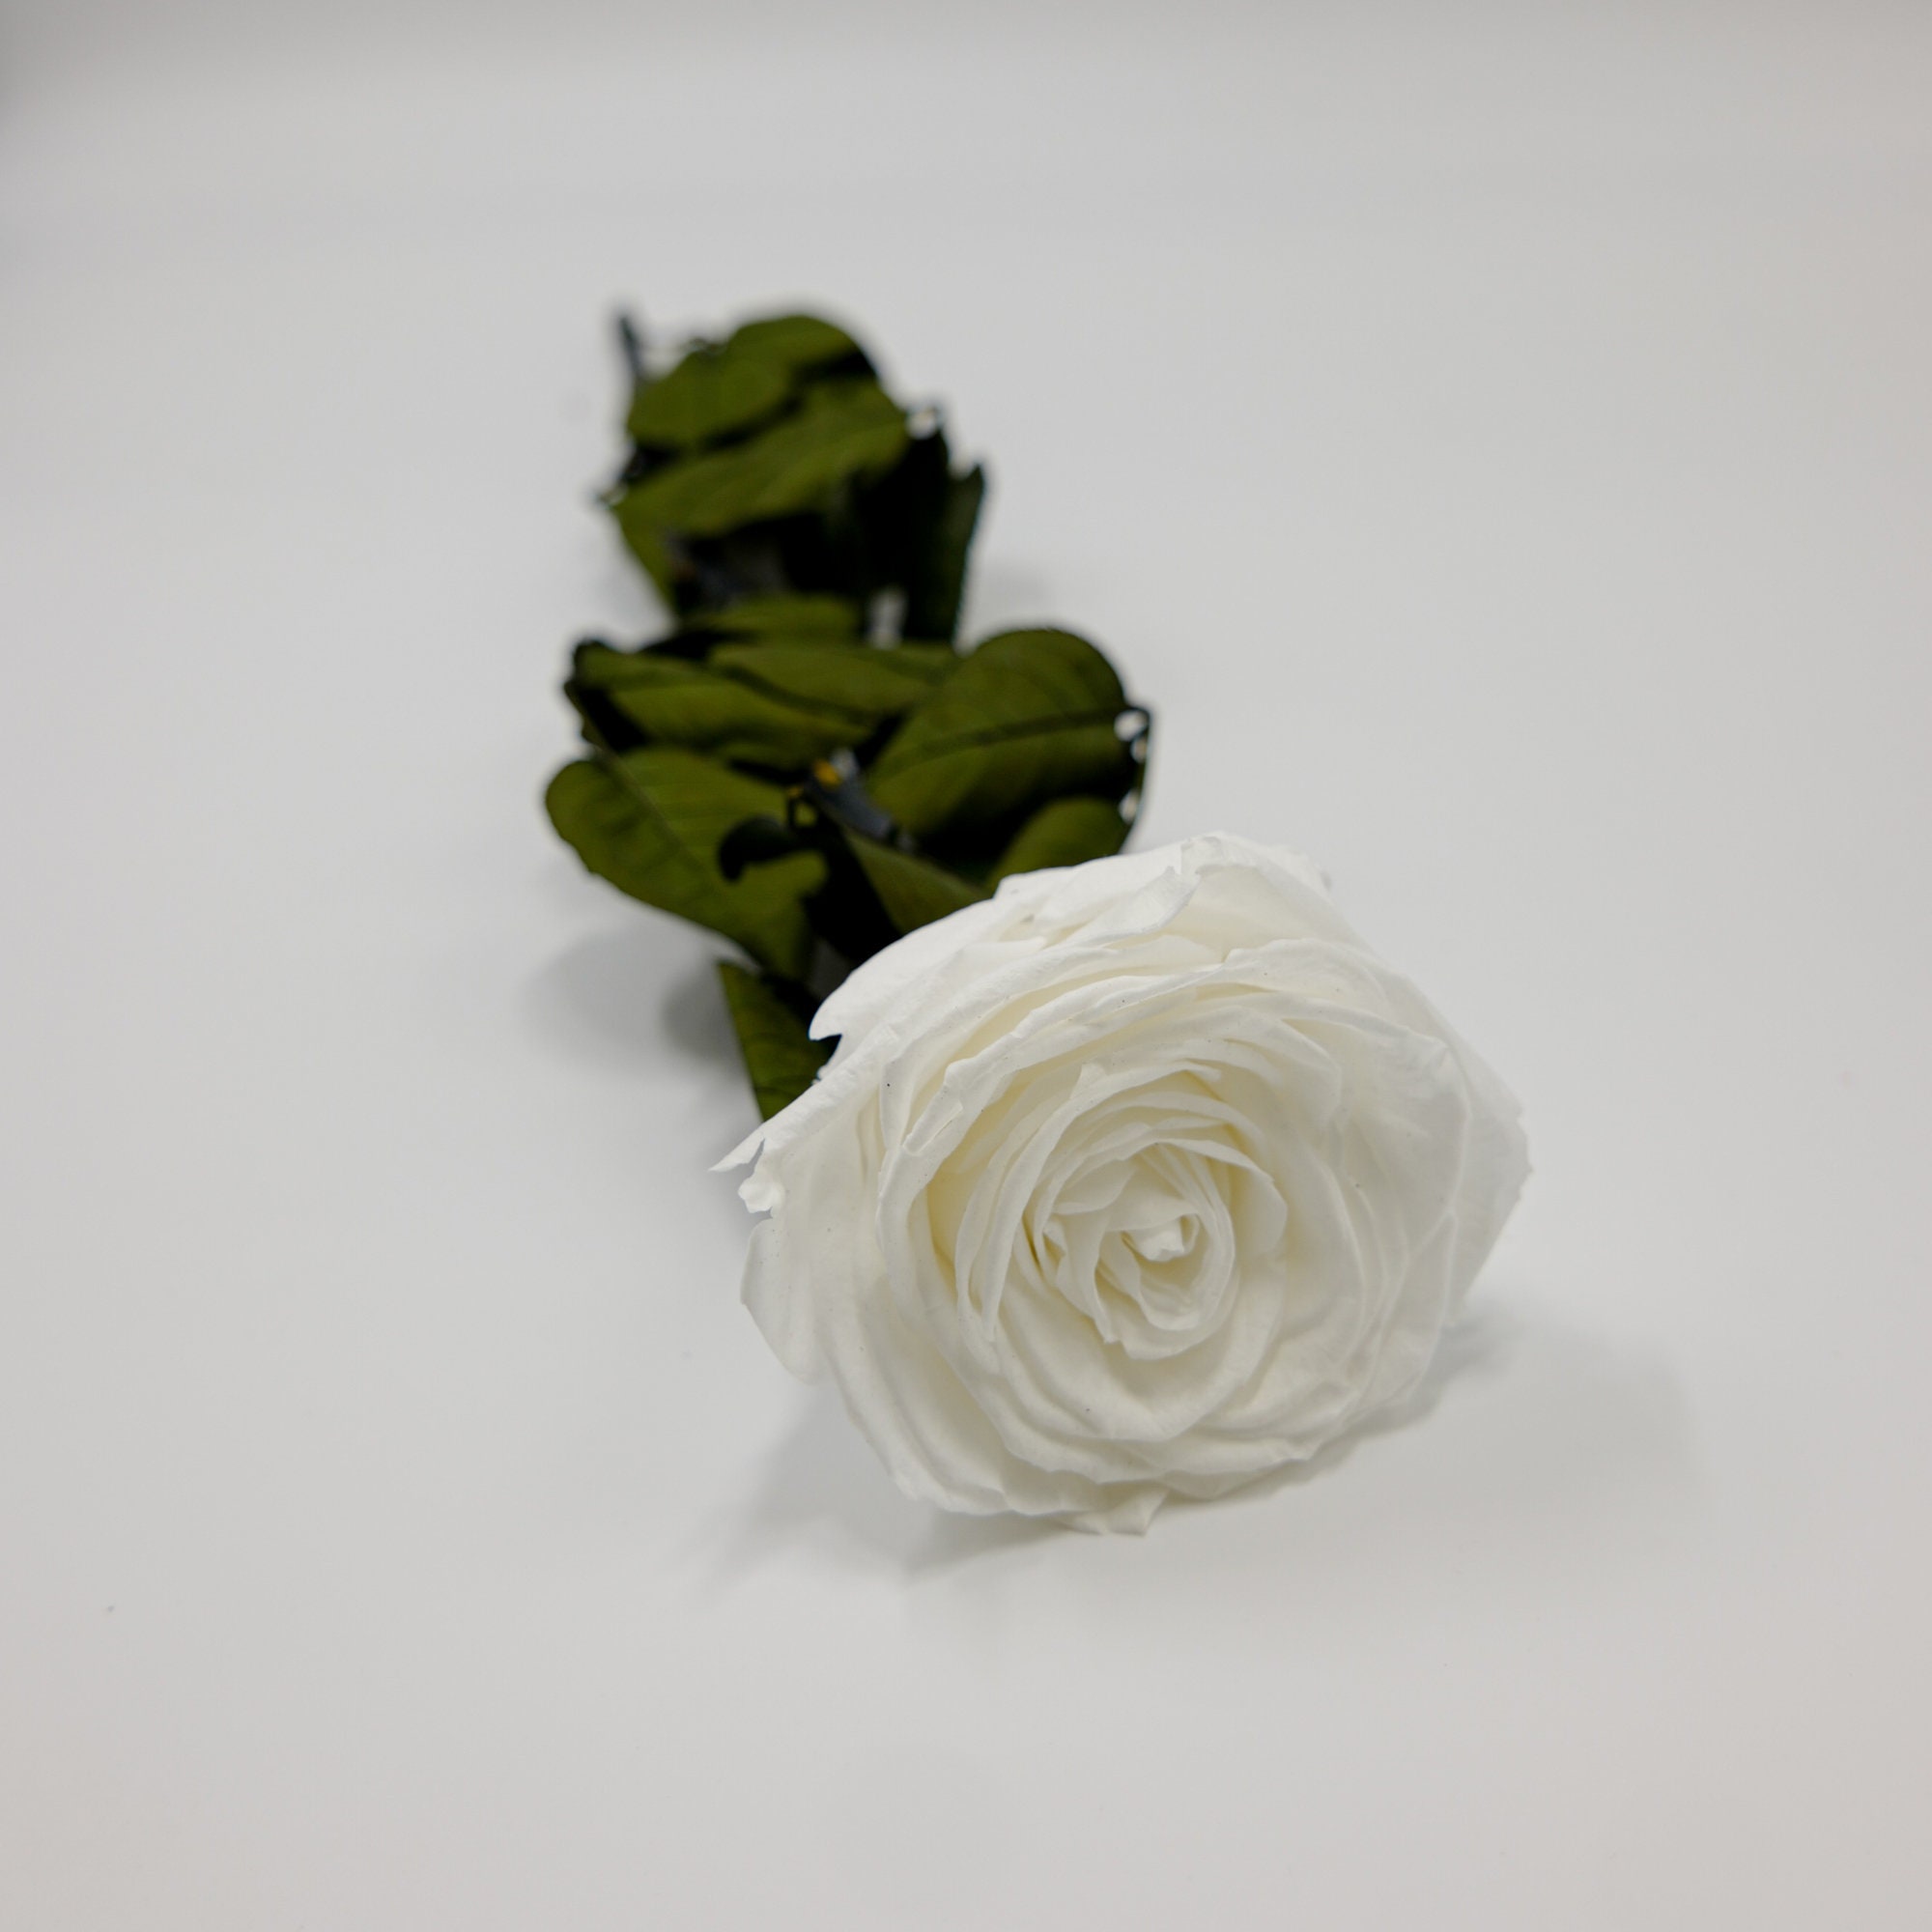 Small Dried Roses With Stem. Dried Roses Mini Bouquet. Dry Flowers Burgundy  With Green Leaves 